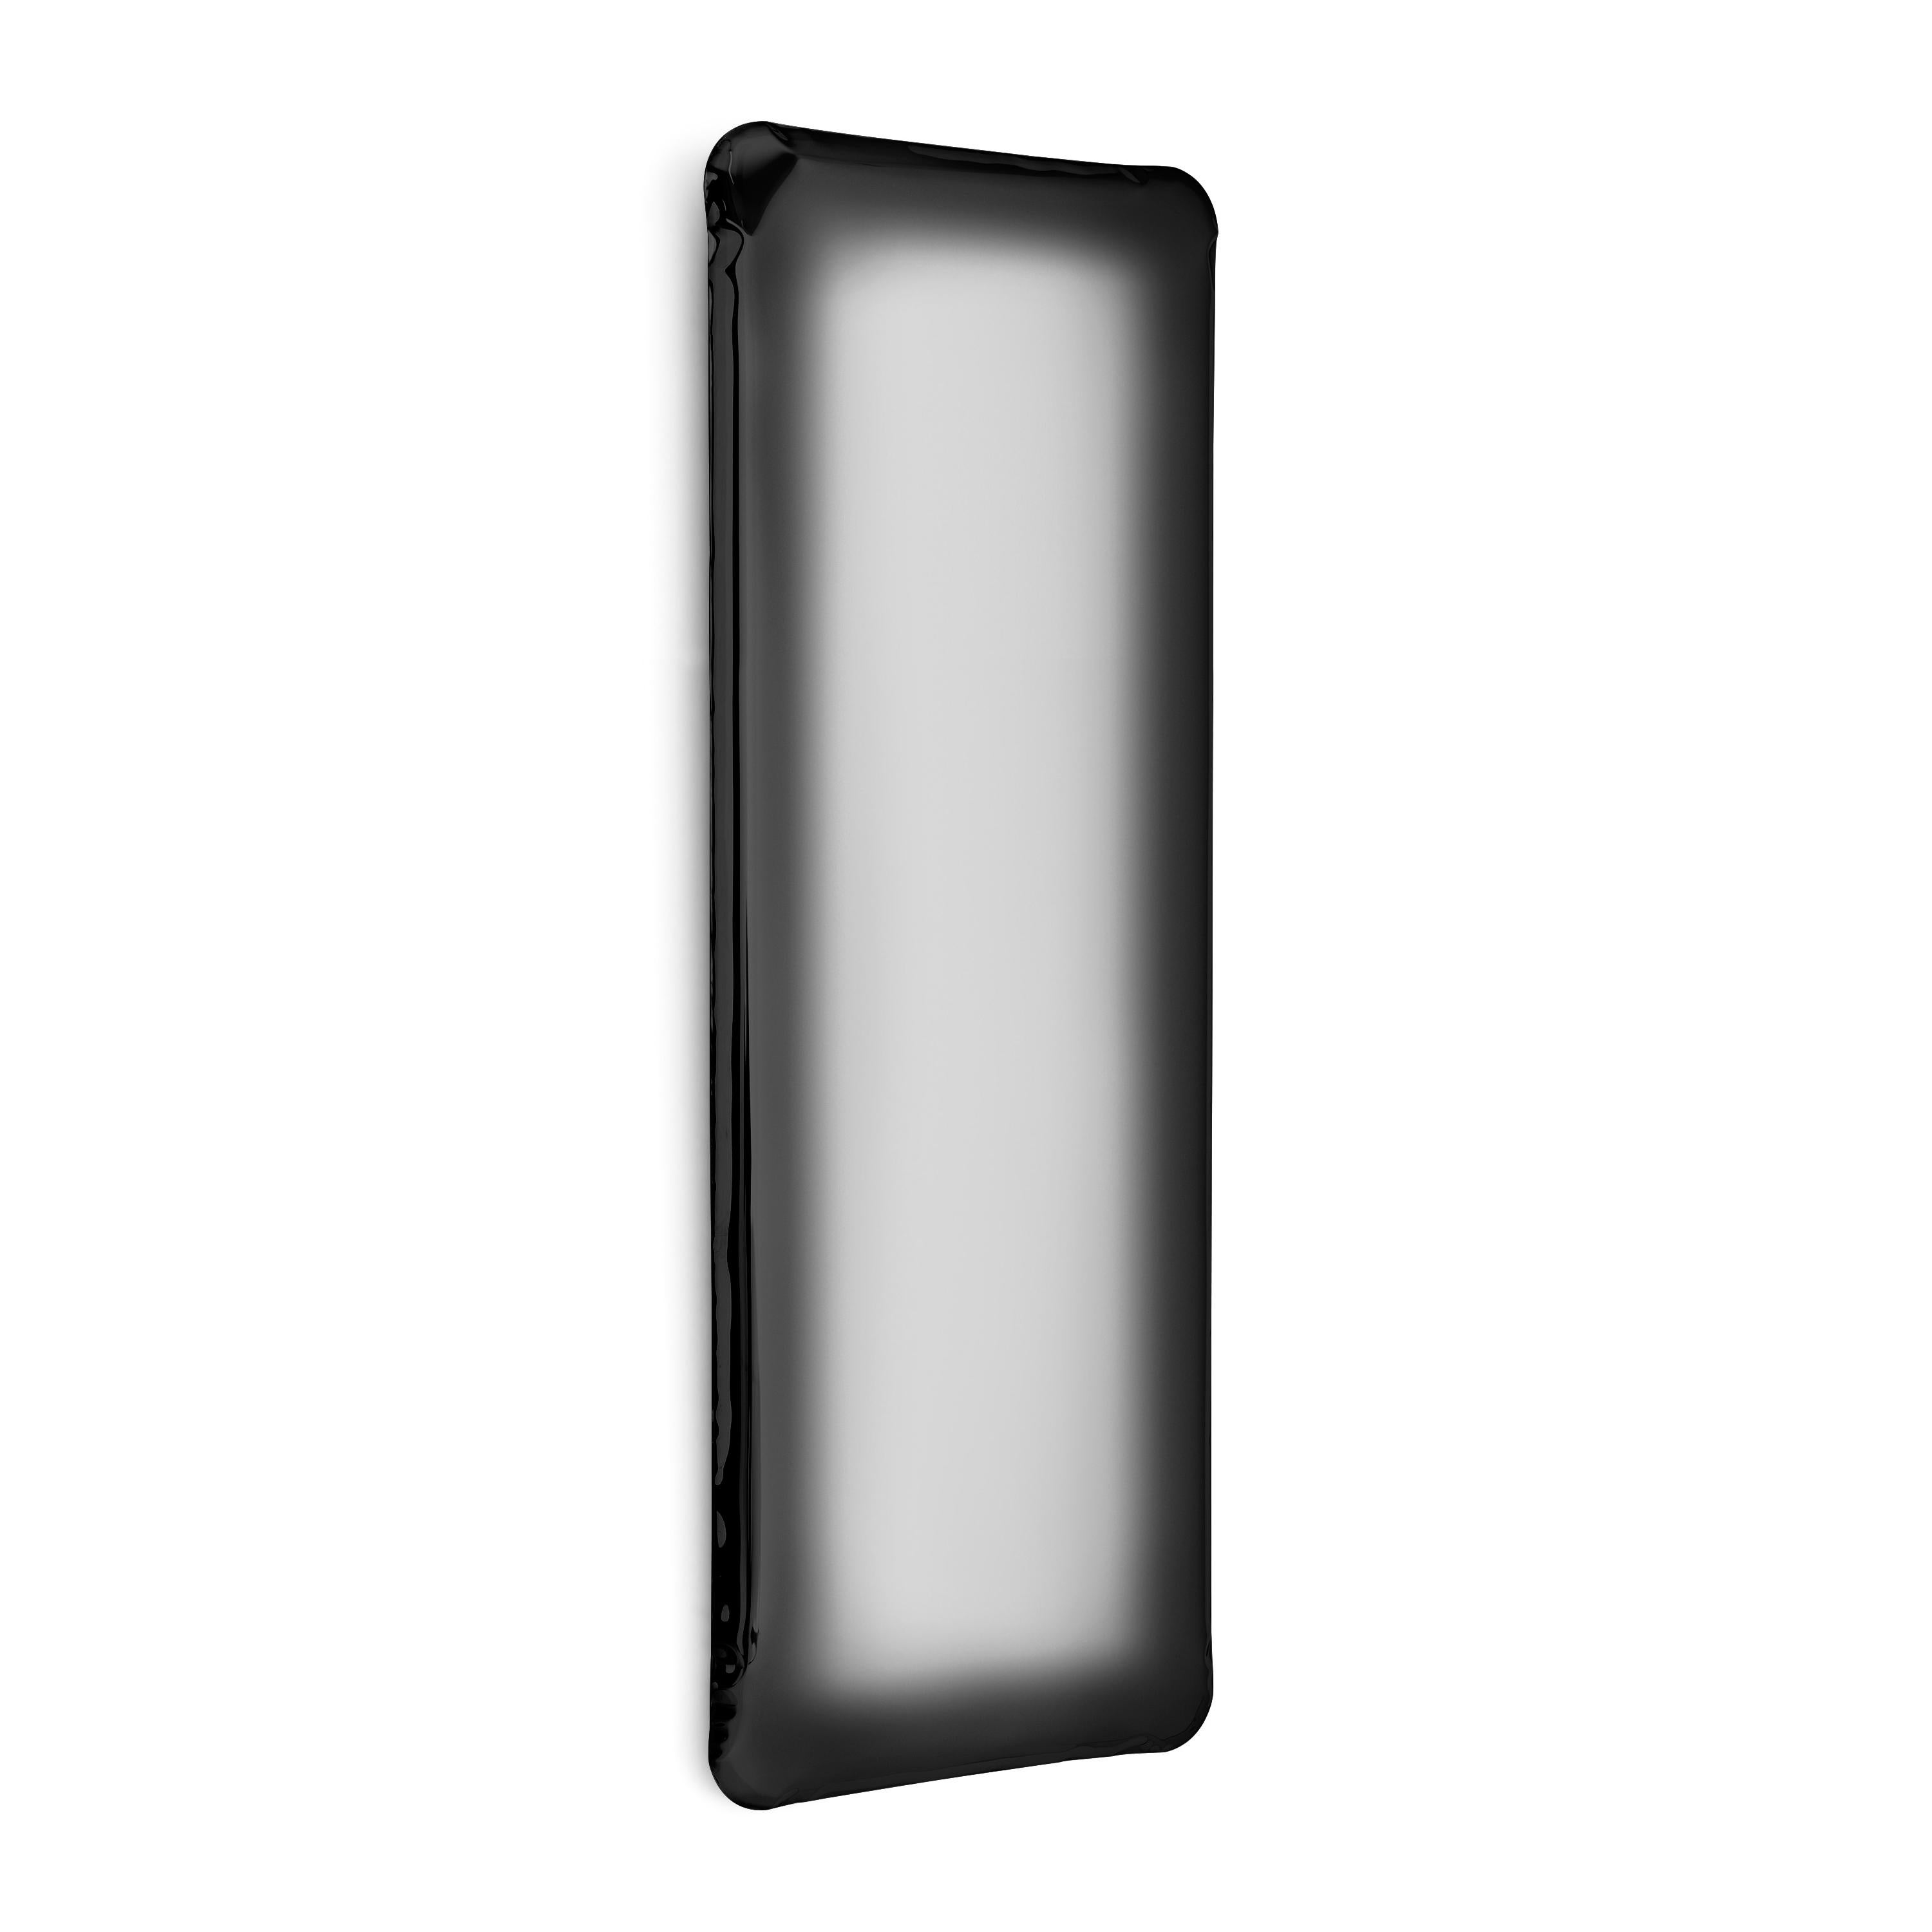 Polished Contemporary Mirror 'Tafla Q2' by Zieta, Transitions, Dark Matter For Sale